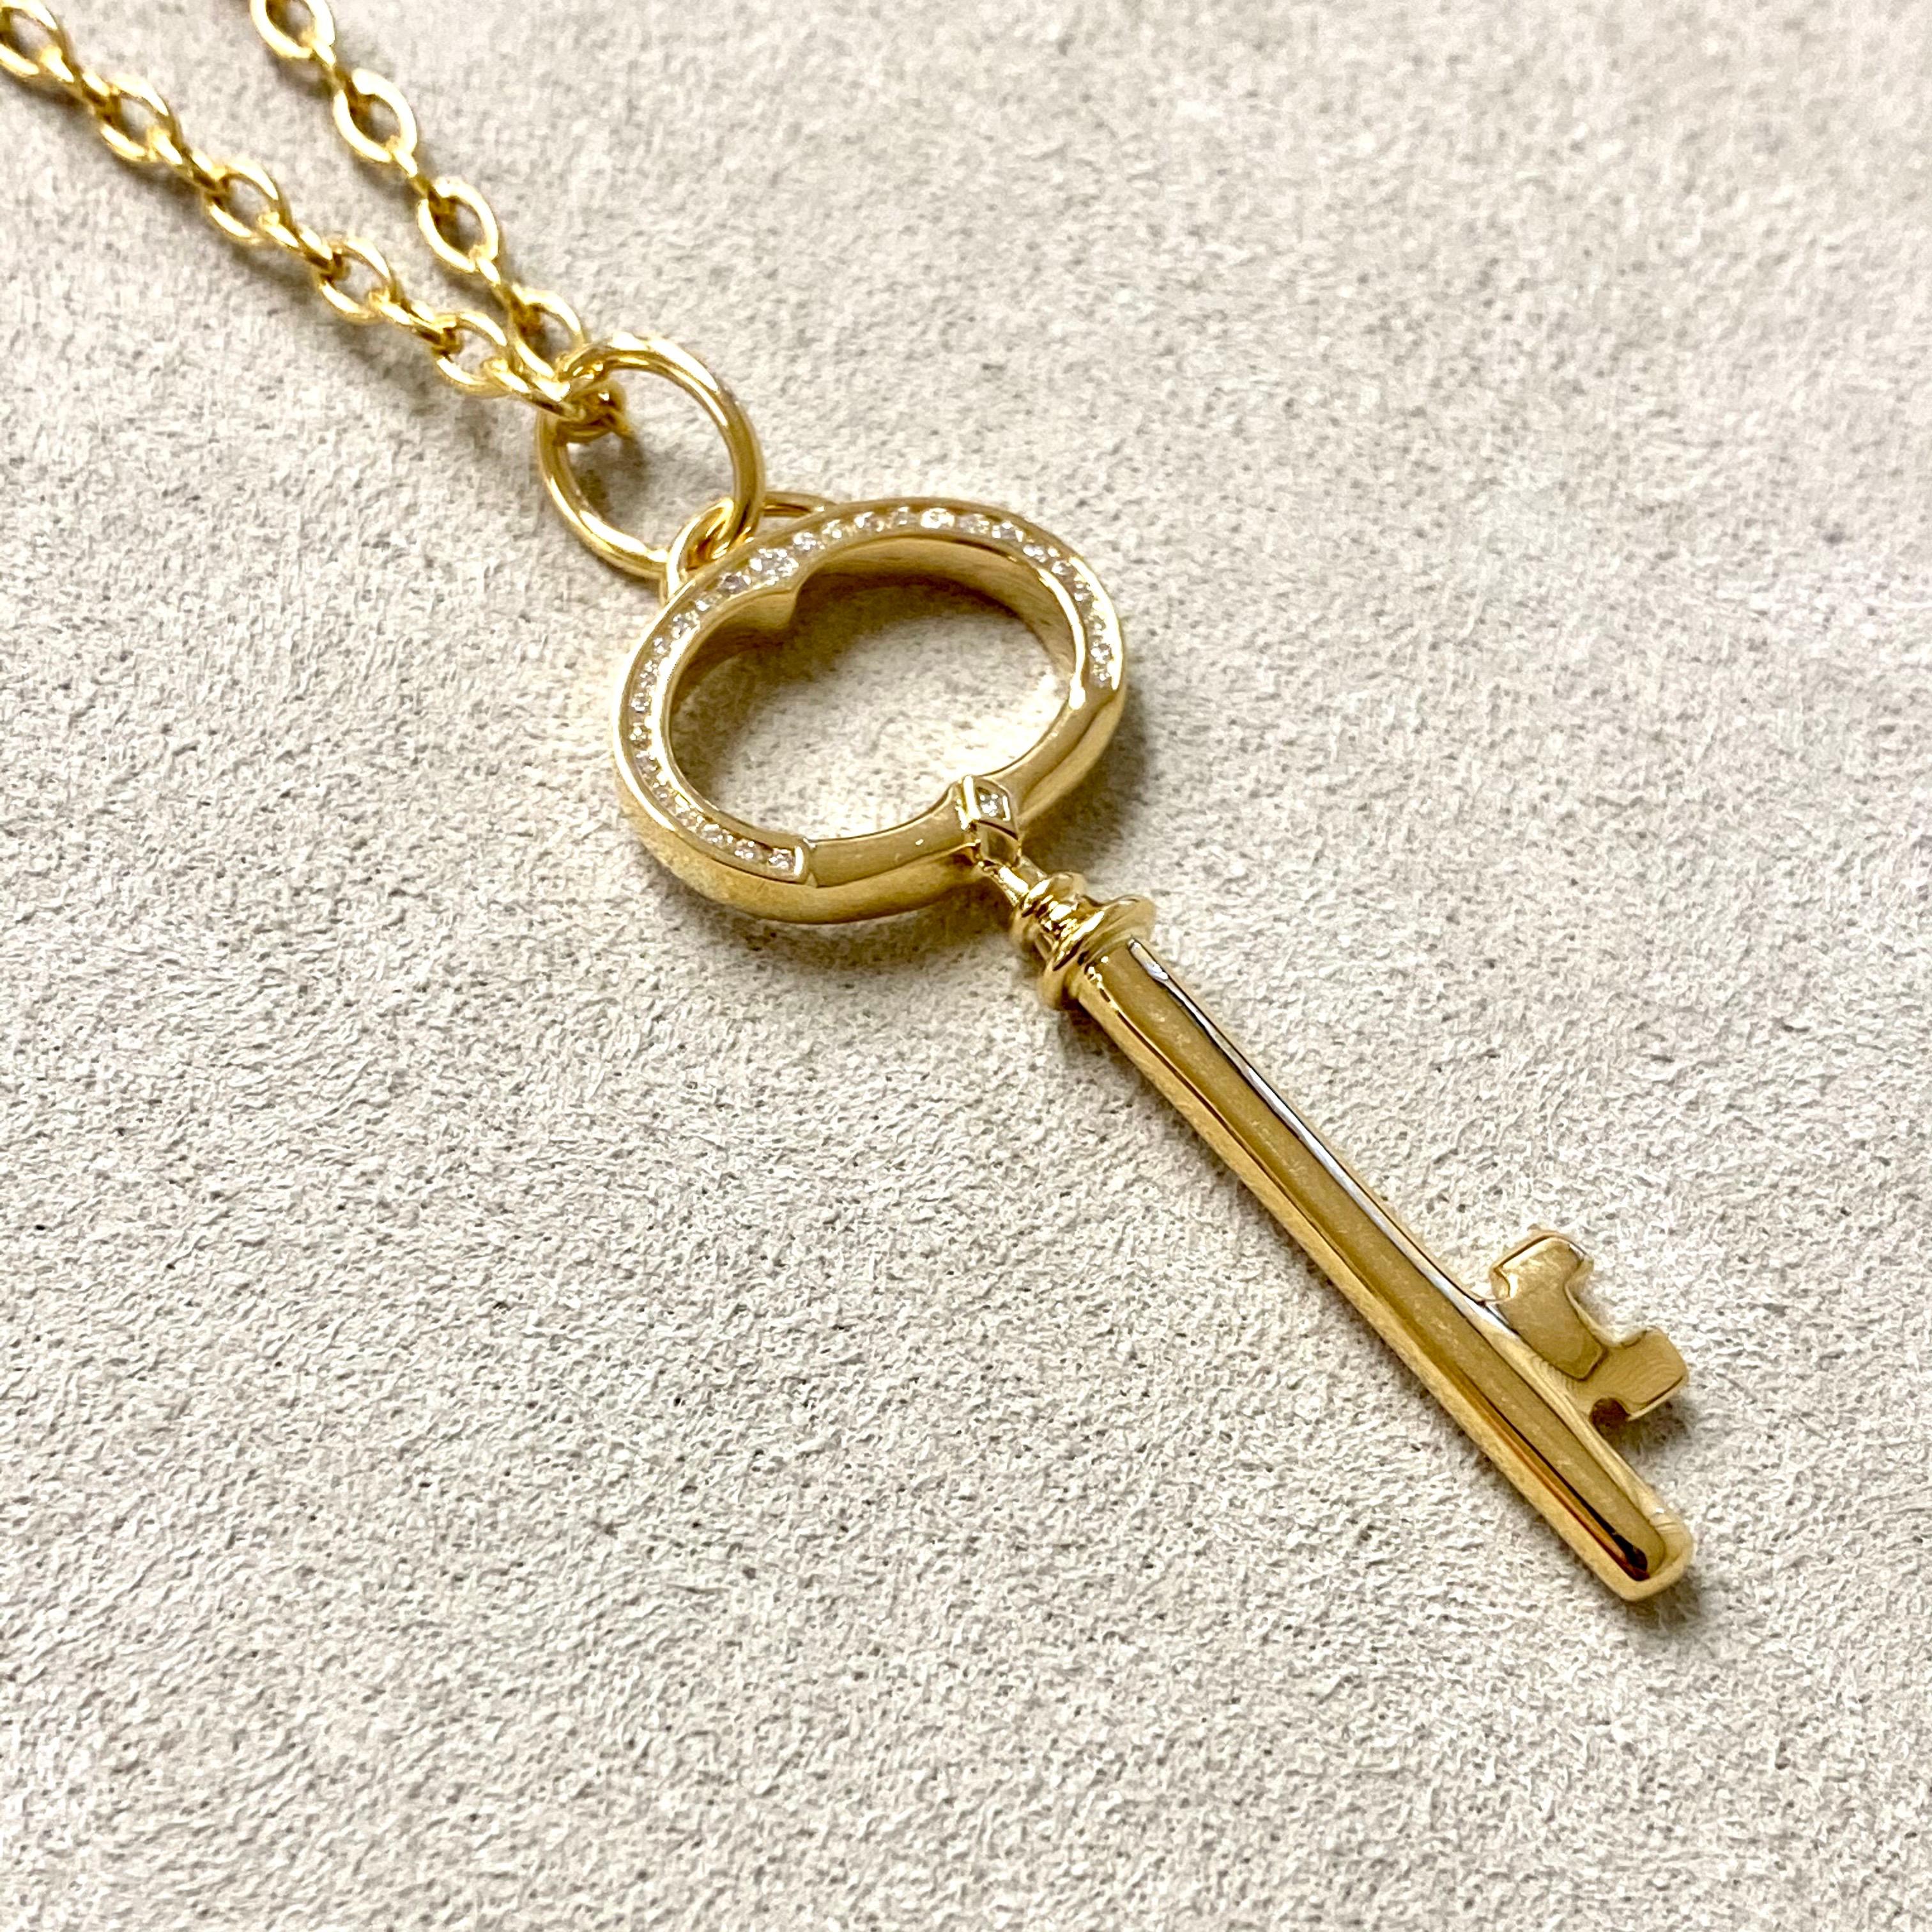 Created in 18 carat yellow gold
Diamonds 0.12 carat approx.
Chain sold separately
Limited edition

Crafted from 18 carat yellow gold, this exclusive piece dazzles with diamonds of approximately 0.12 carats. An accompanying neck-chain can be